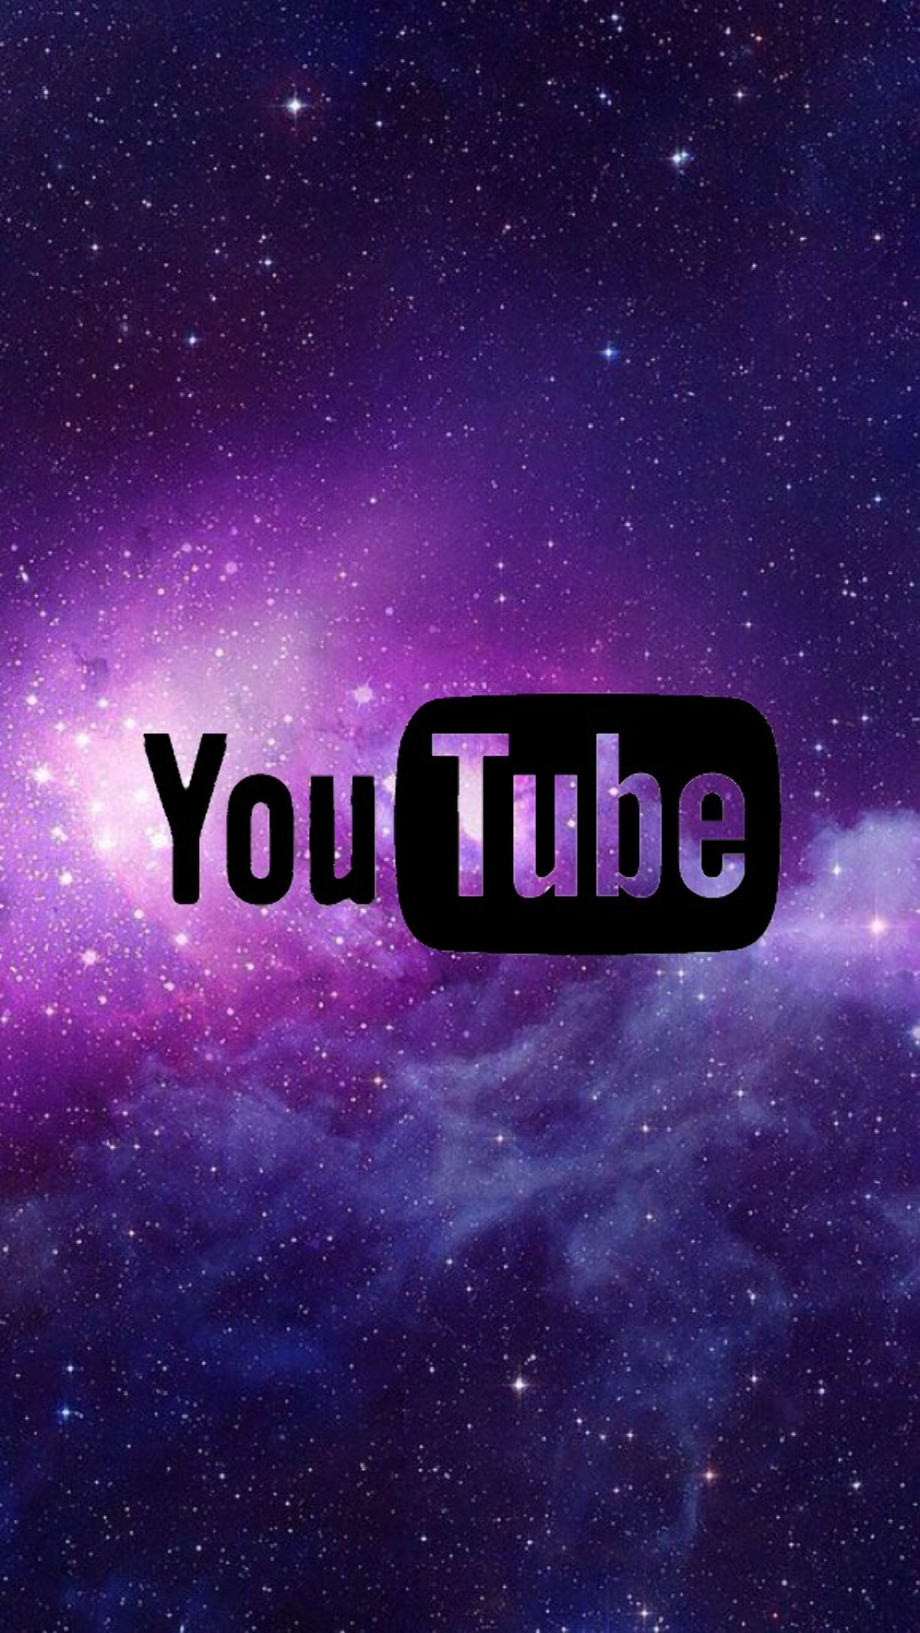 Download High Quality logo youtube galaxy Transparent PNG Images - Art